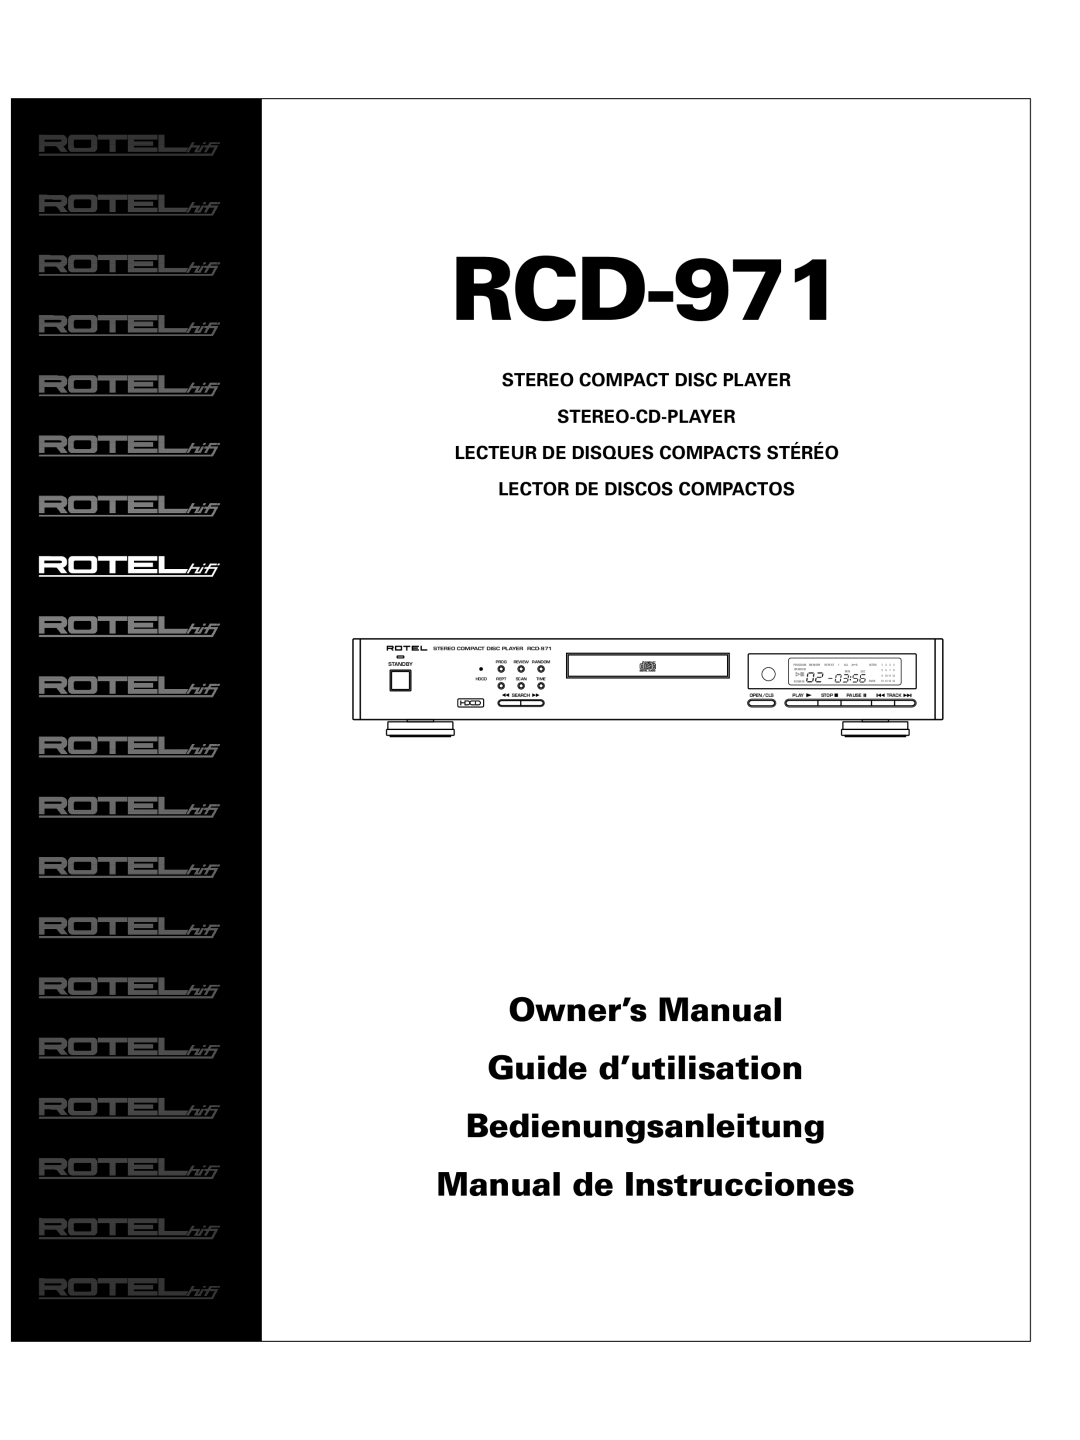 Rotel RCD-971 owner manual Guide d’utilisation, Bedienungsanleitung, Manual de Instrucciones, Stereo Compact Disc Player 